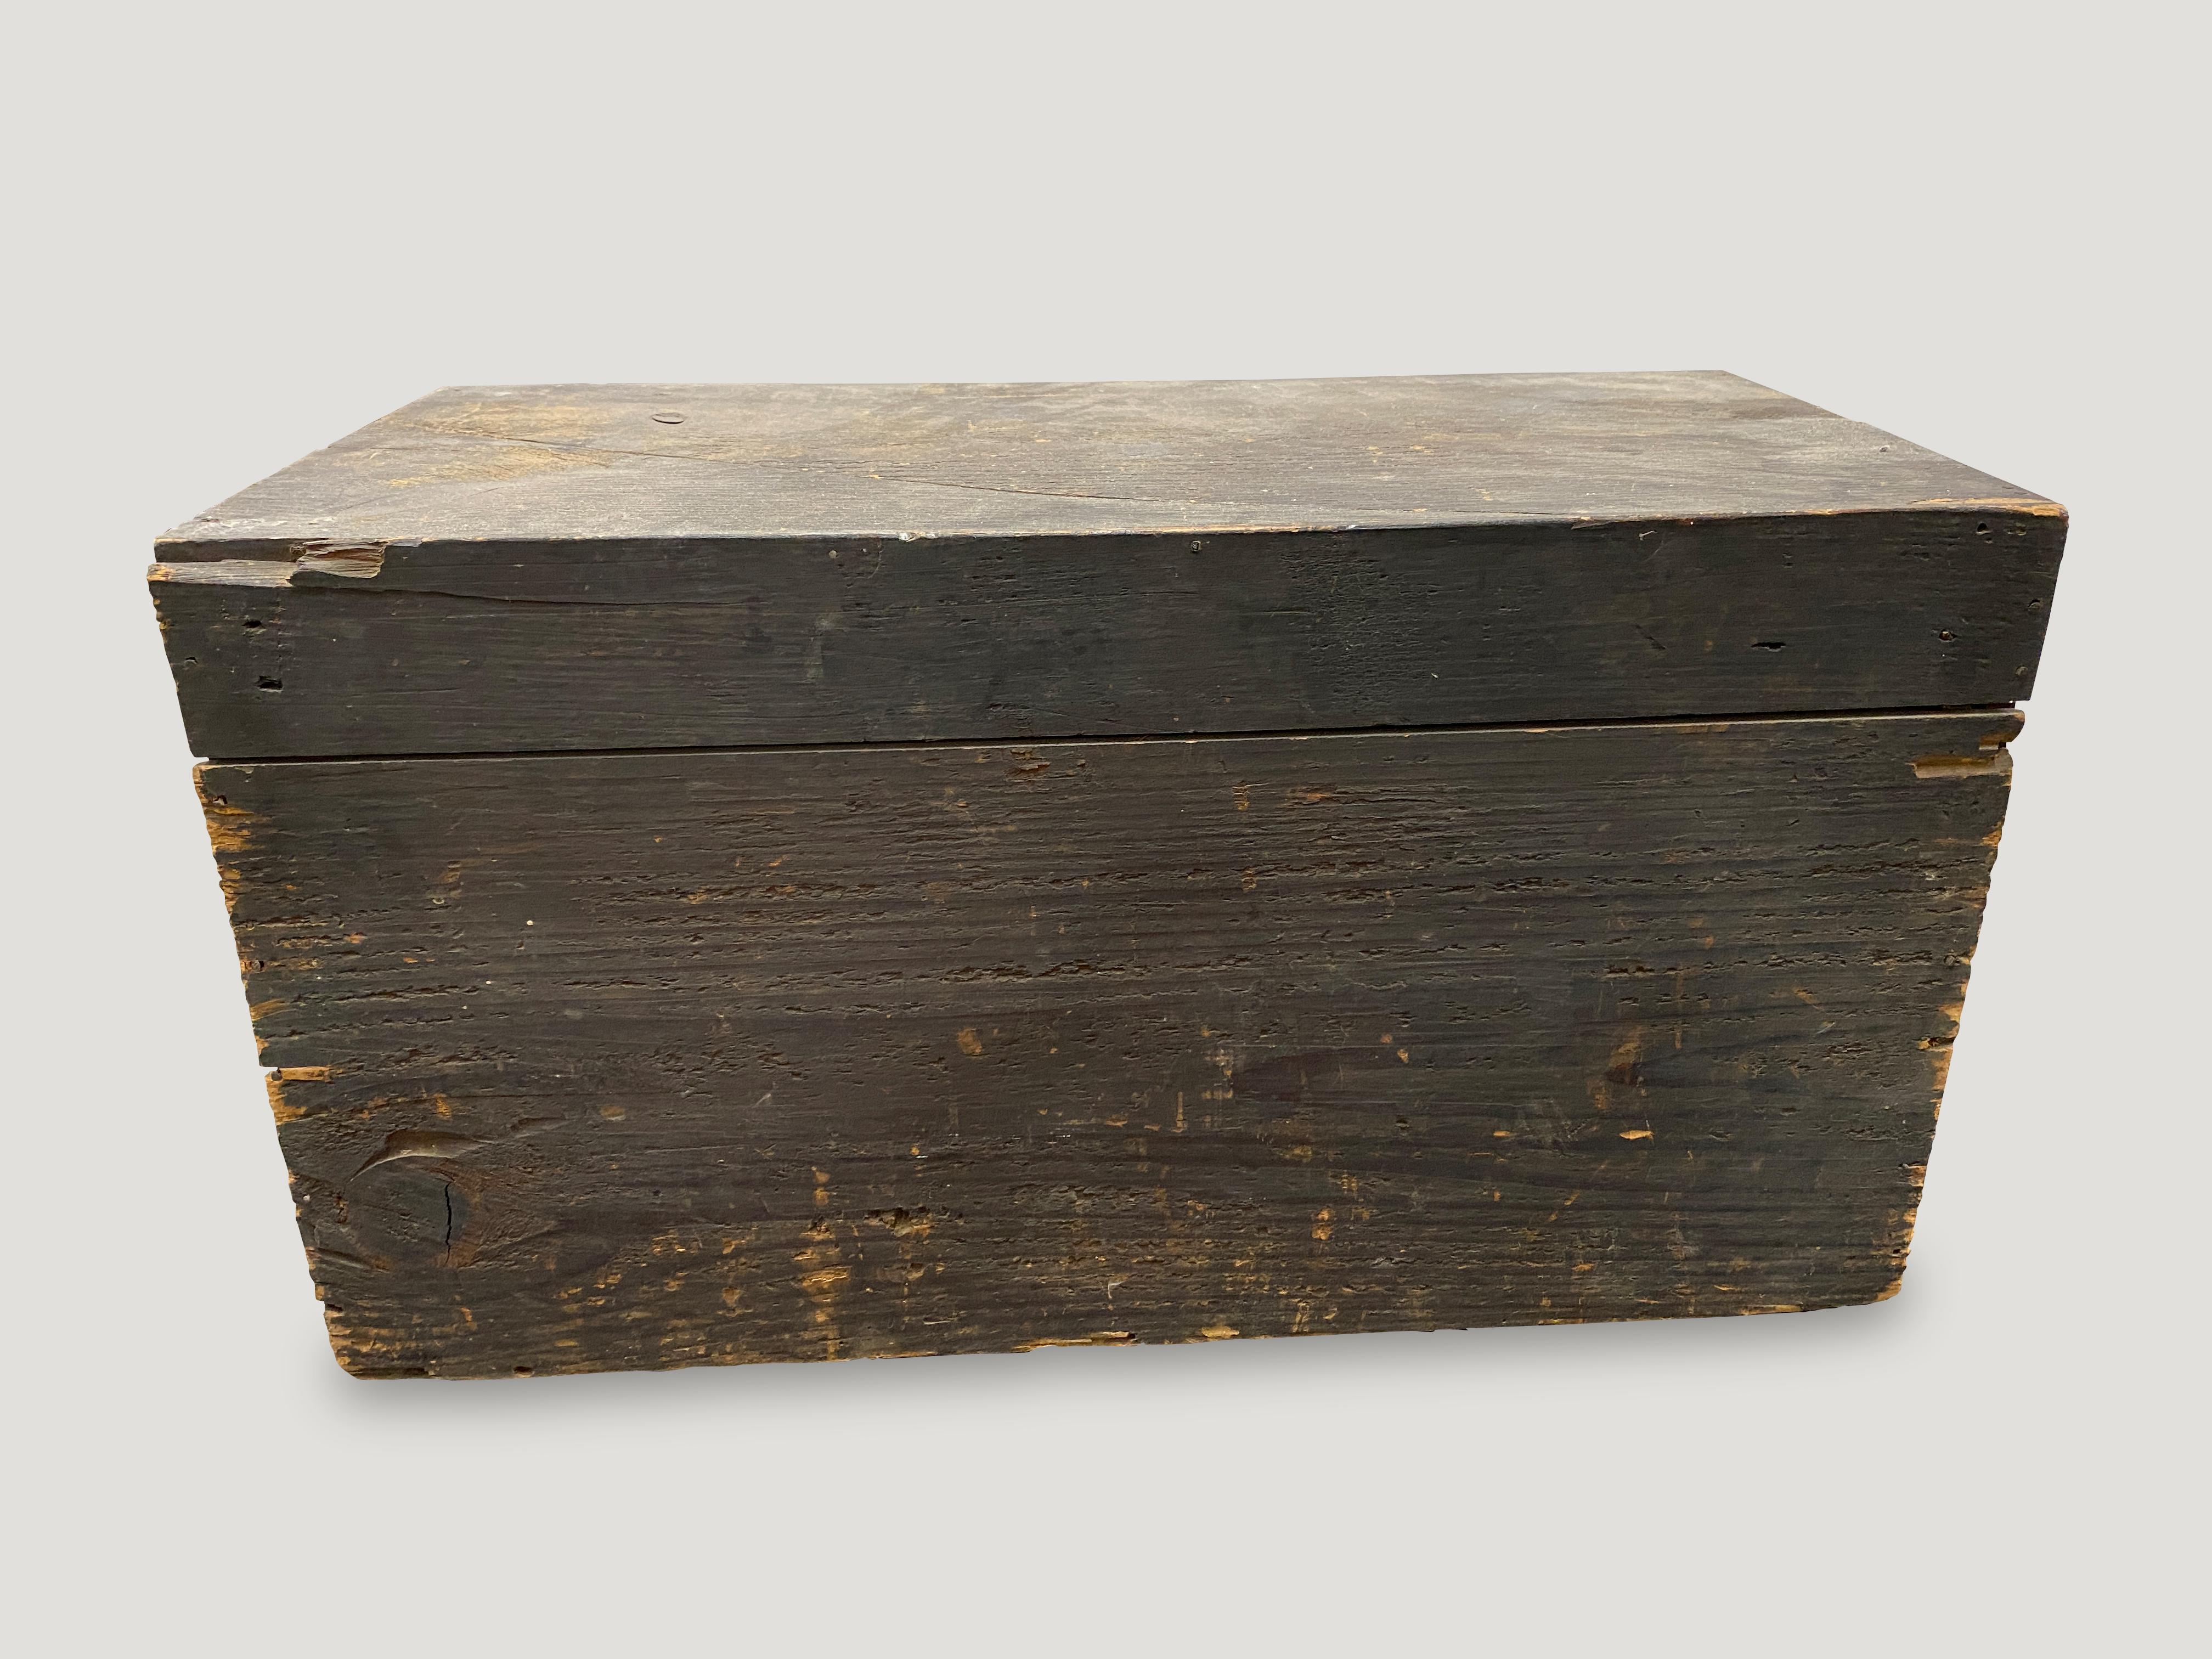 Andrianna Shamaris Antique Japanese Wabi Sabi Wood Tansu Chest In Distressed Condition In New York, NY